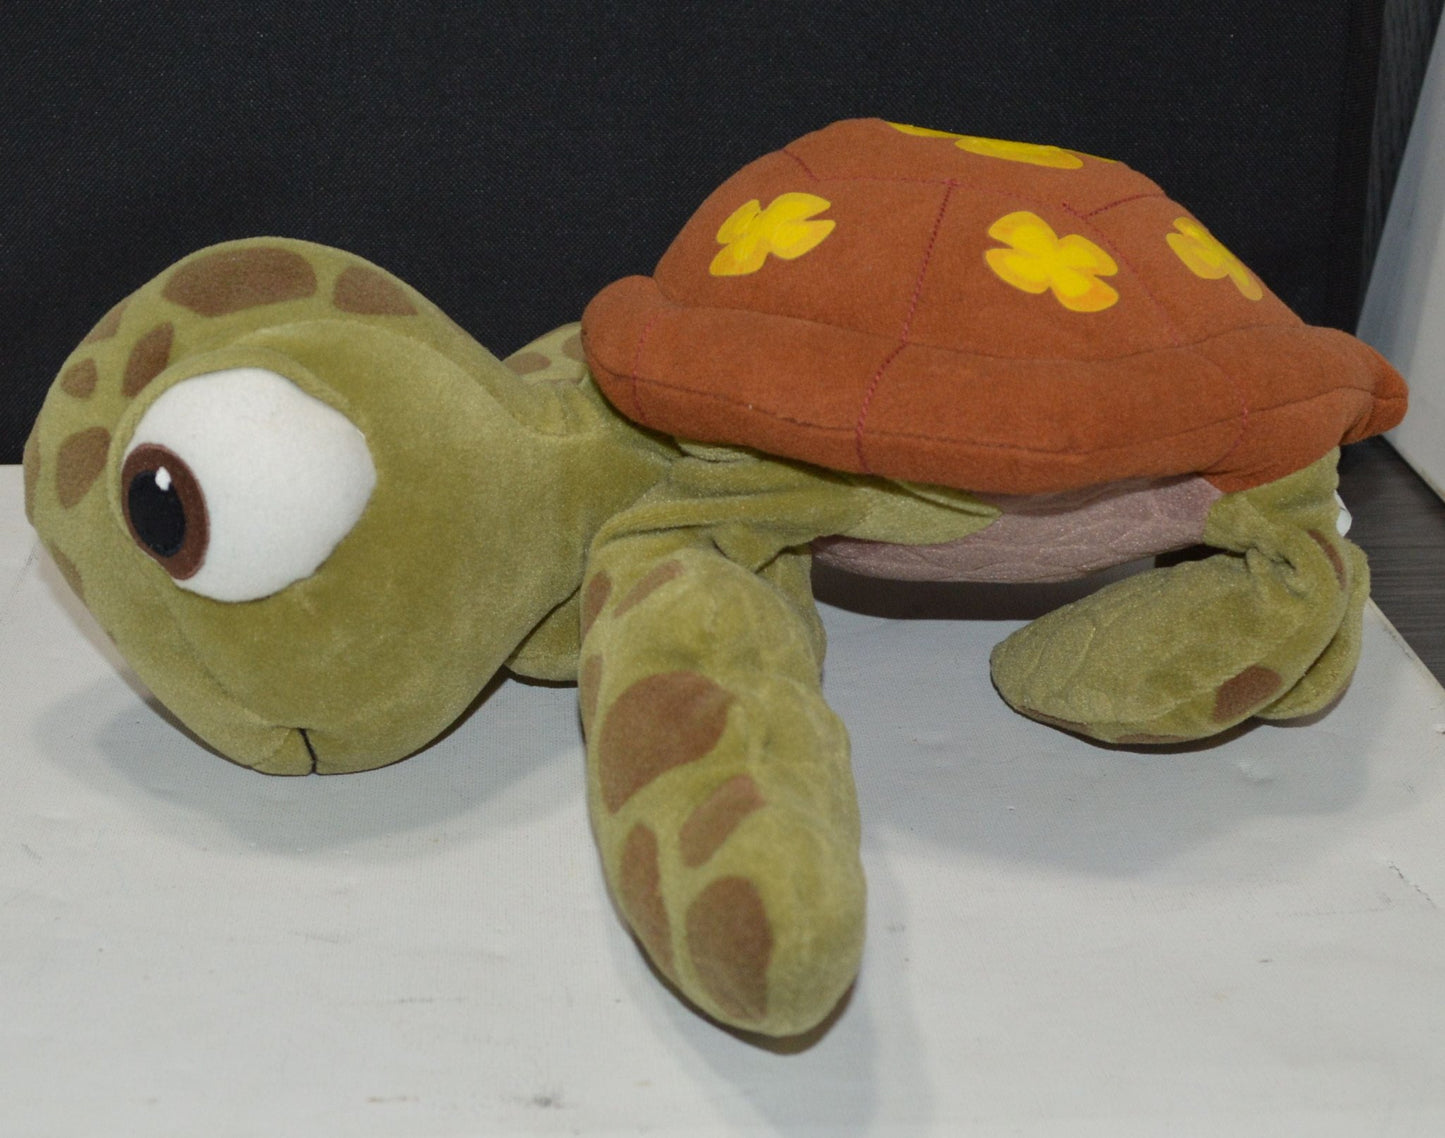 DISNEY SOFT TOY FINDING NEMO TURTLE CRUSH(PREVIOUSLY OWNED)VERY GOOD CONDITION - TMD167207